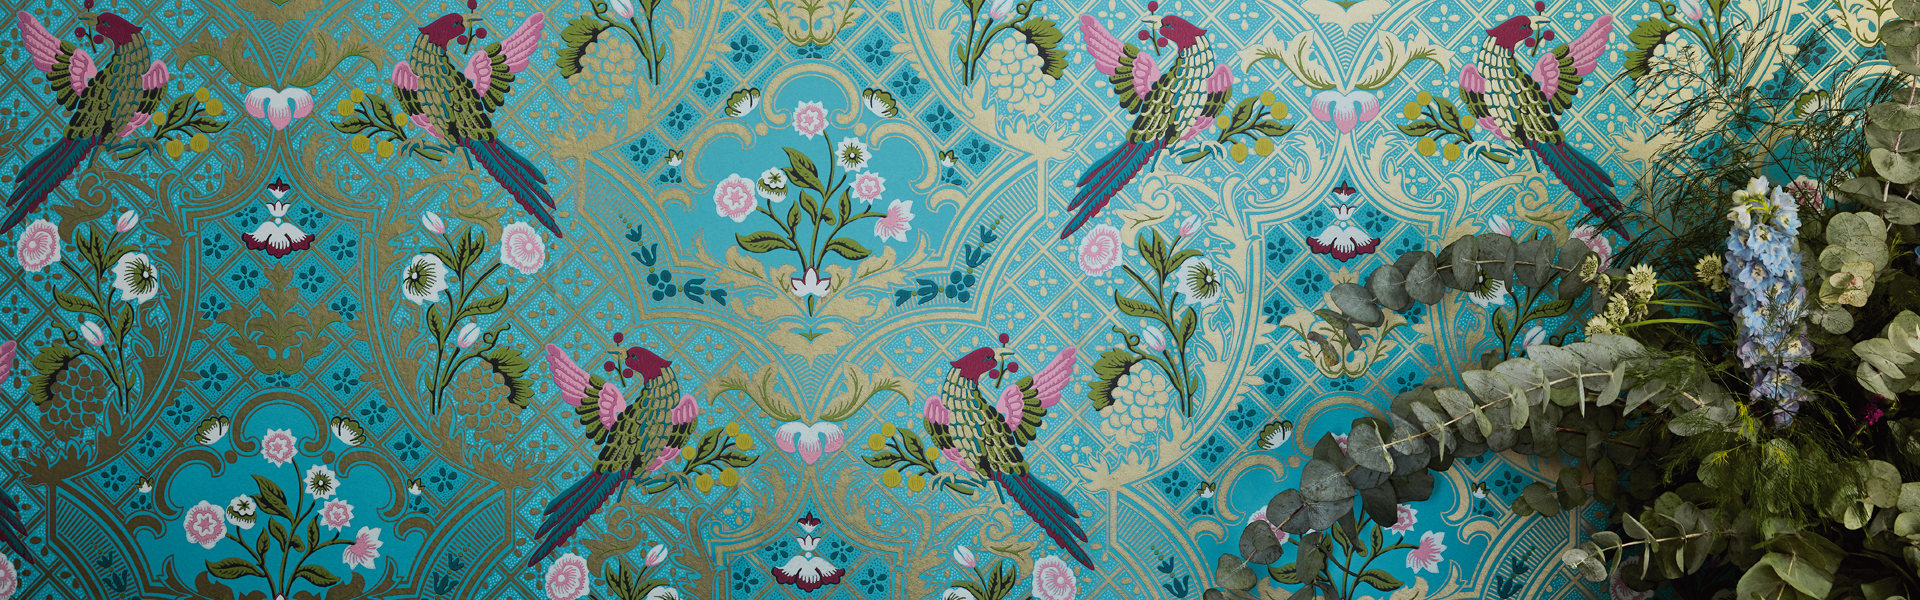 Maximalist Fabric Wallpaper and Home Decor  Spoonflower